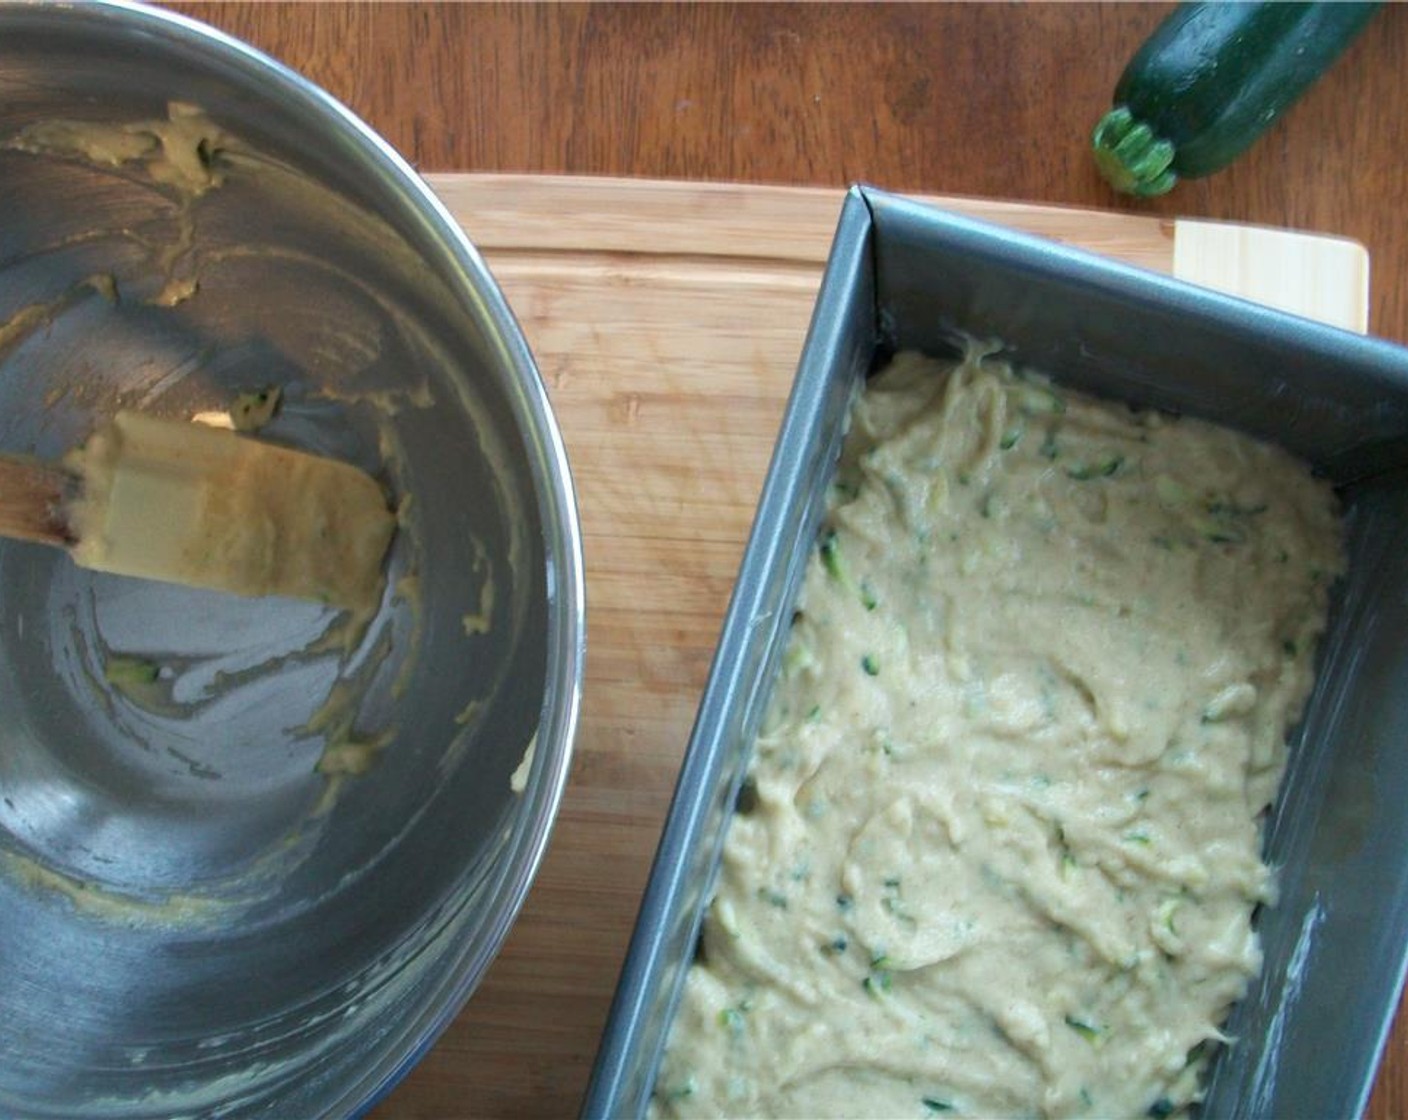 step 4 Add the flour mixture to the zucchini mixture and stir just until incorporated. Pour batter into a well greased loaf pan.